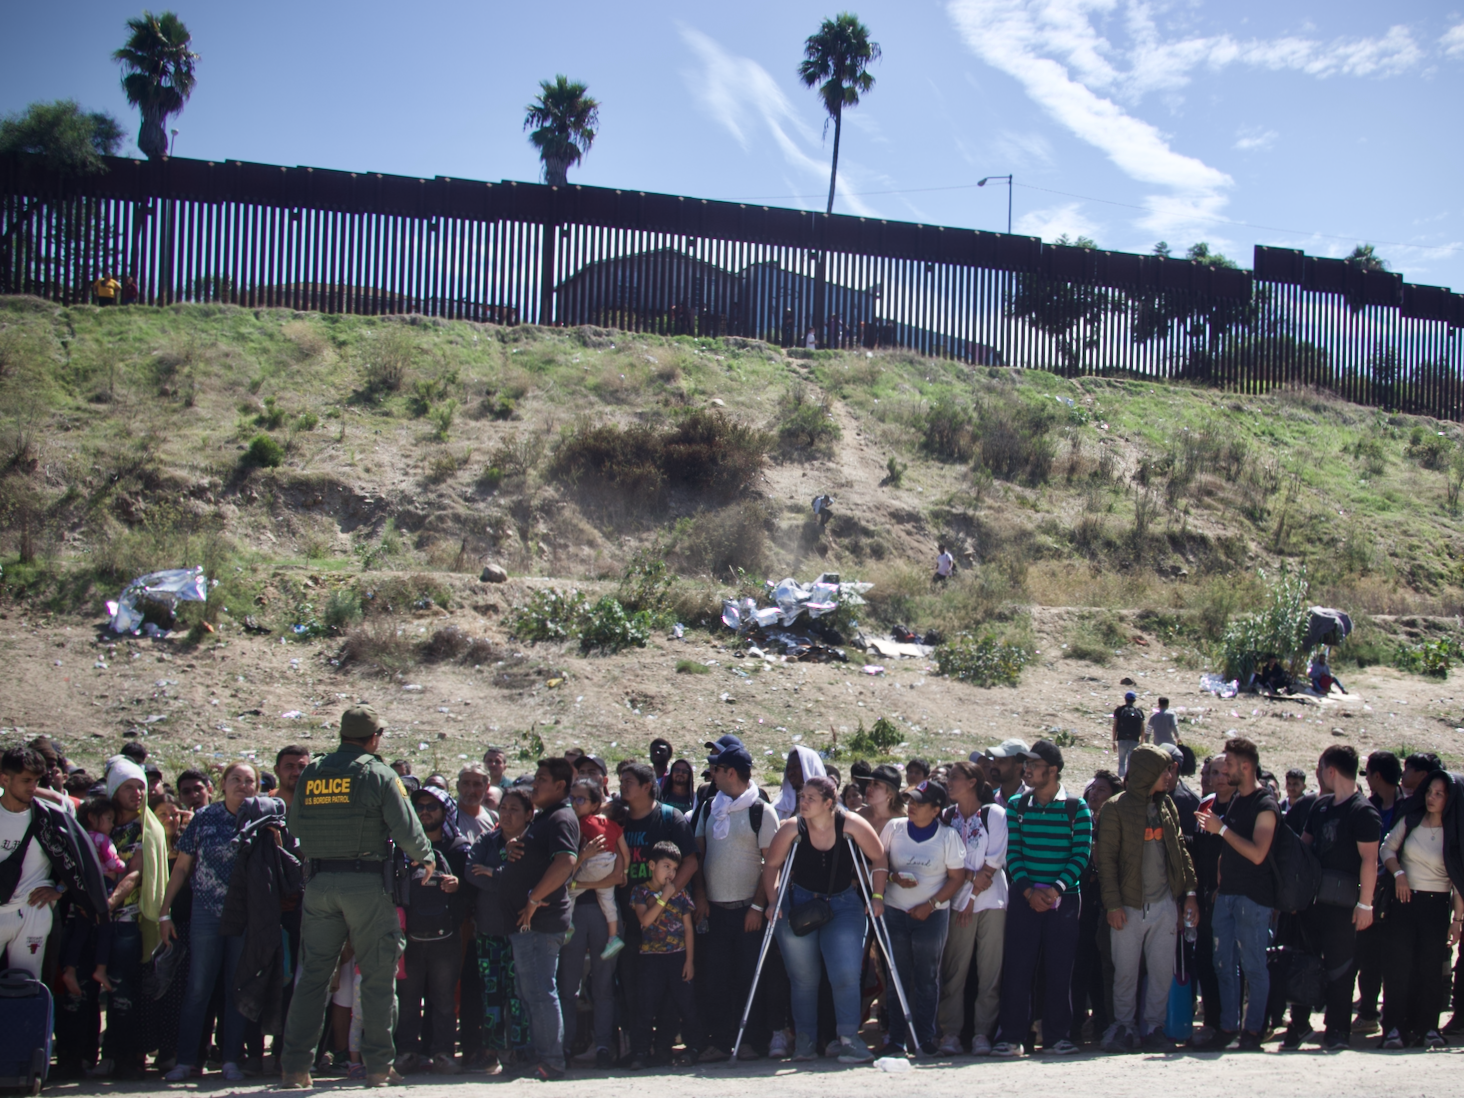 people migrating held at the border